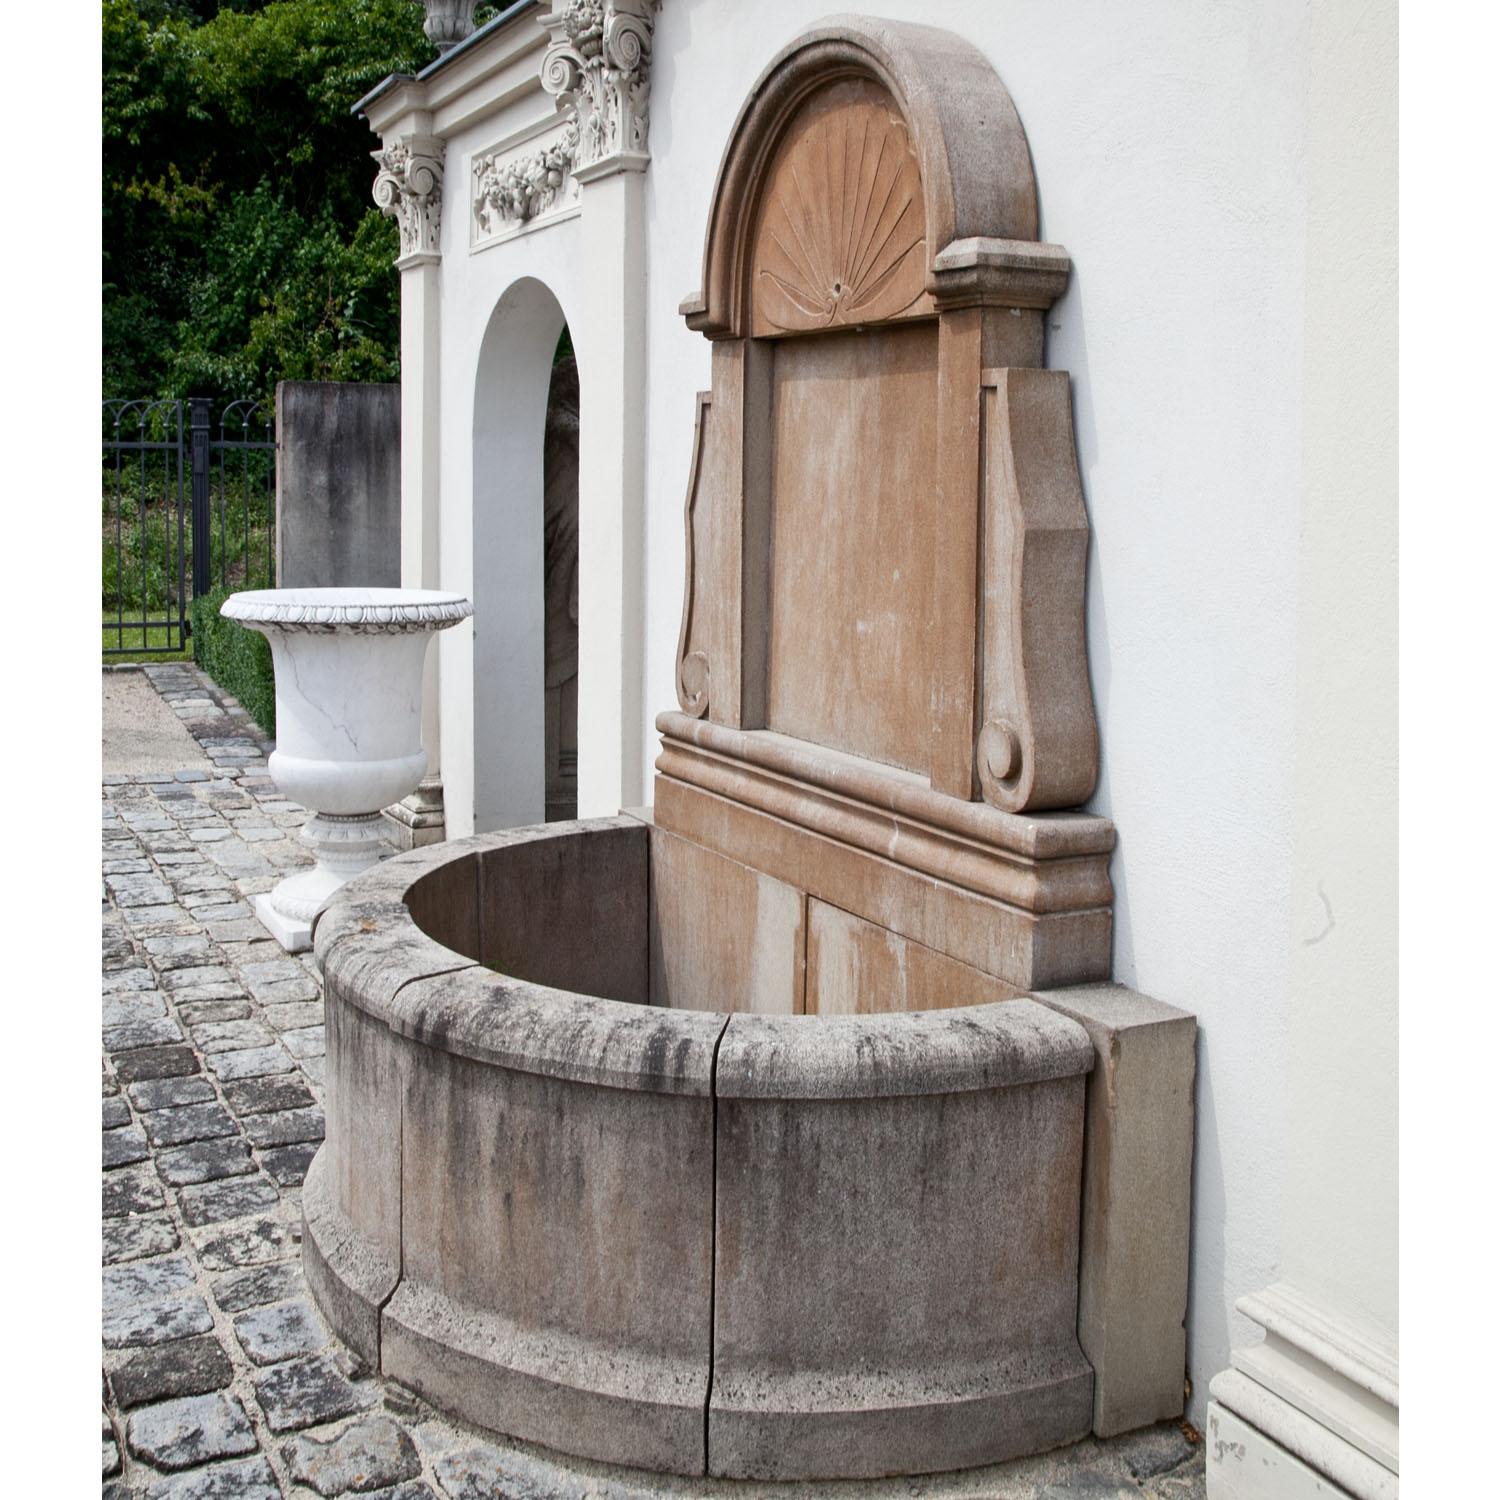 Wall fountain out of hand-carved patinated sandstone with a semicircular basin (H: 62 cm) and a tall rear wall with a relief shell décor, a rounded pediment and volute details towards the sides. The spout is installed in the center of the shell